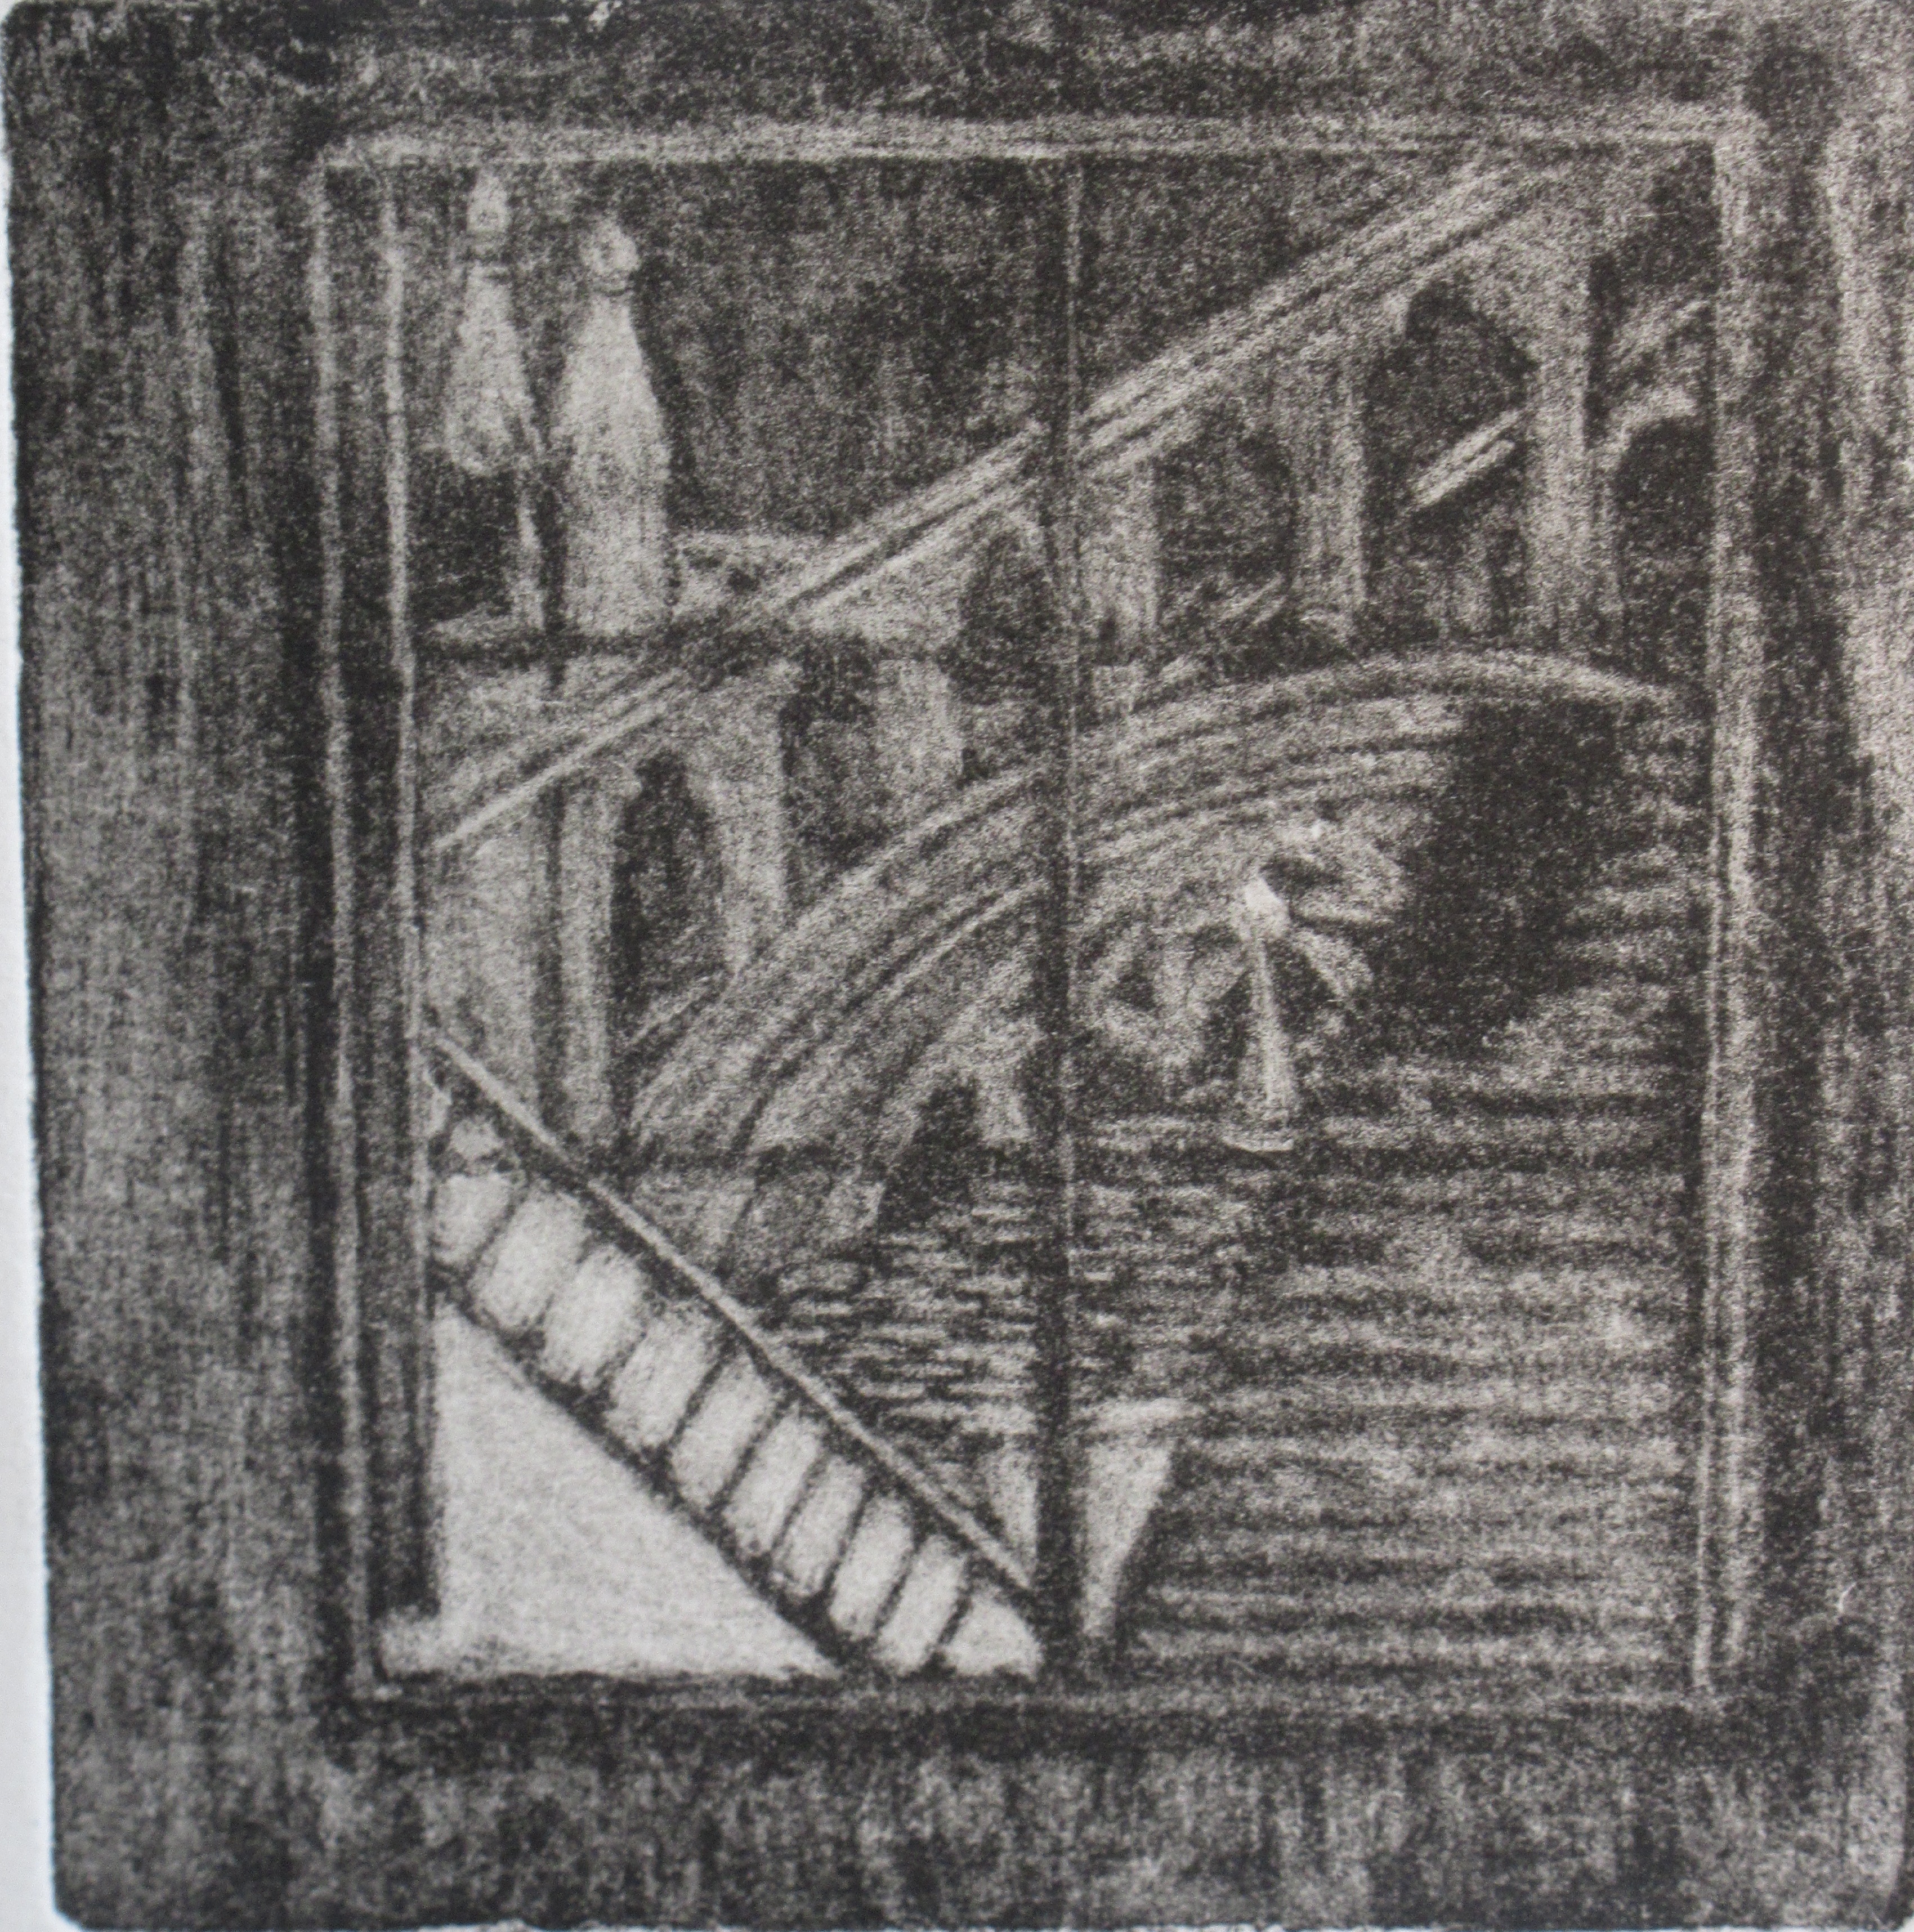 Black and white etching of a window